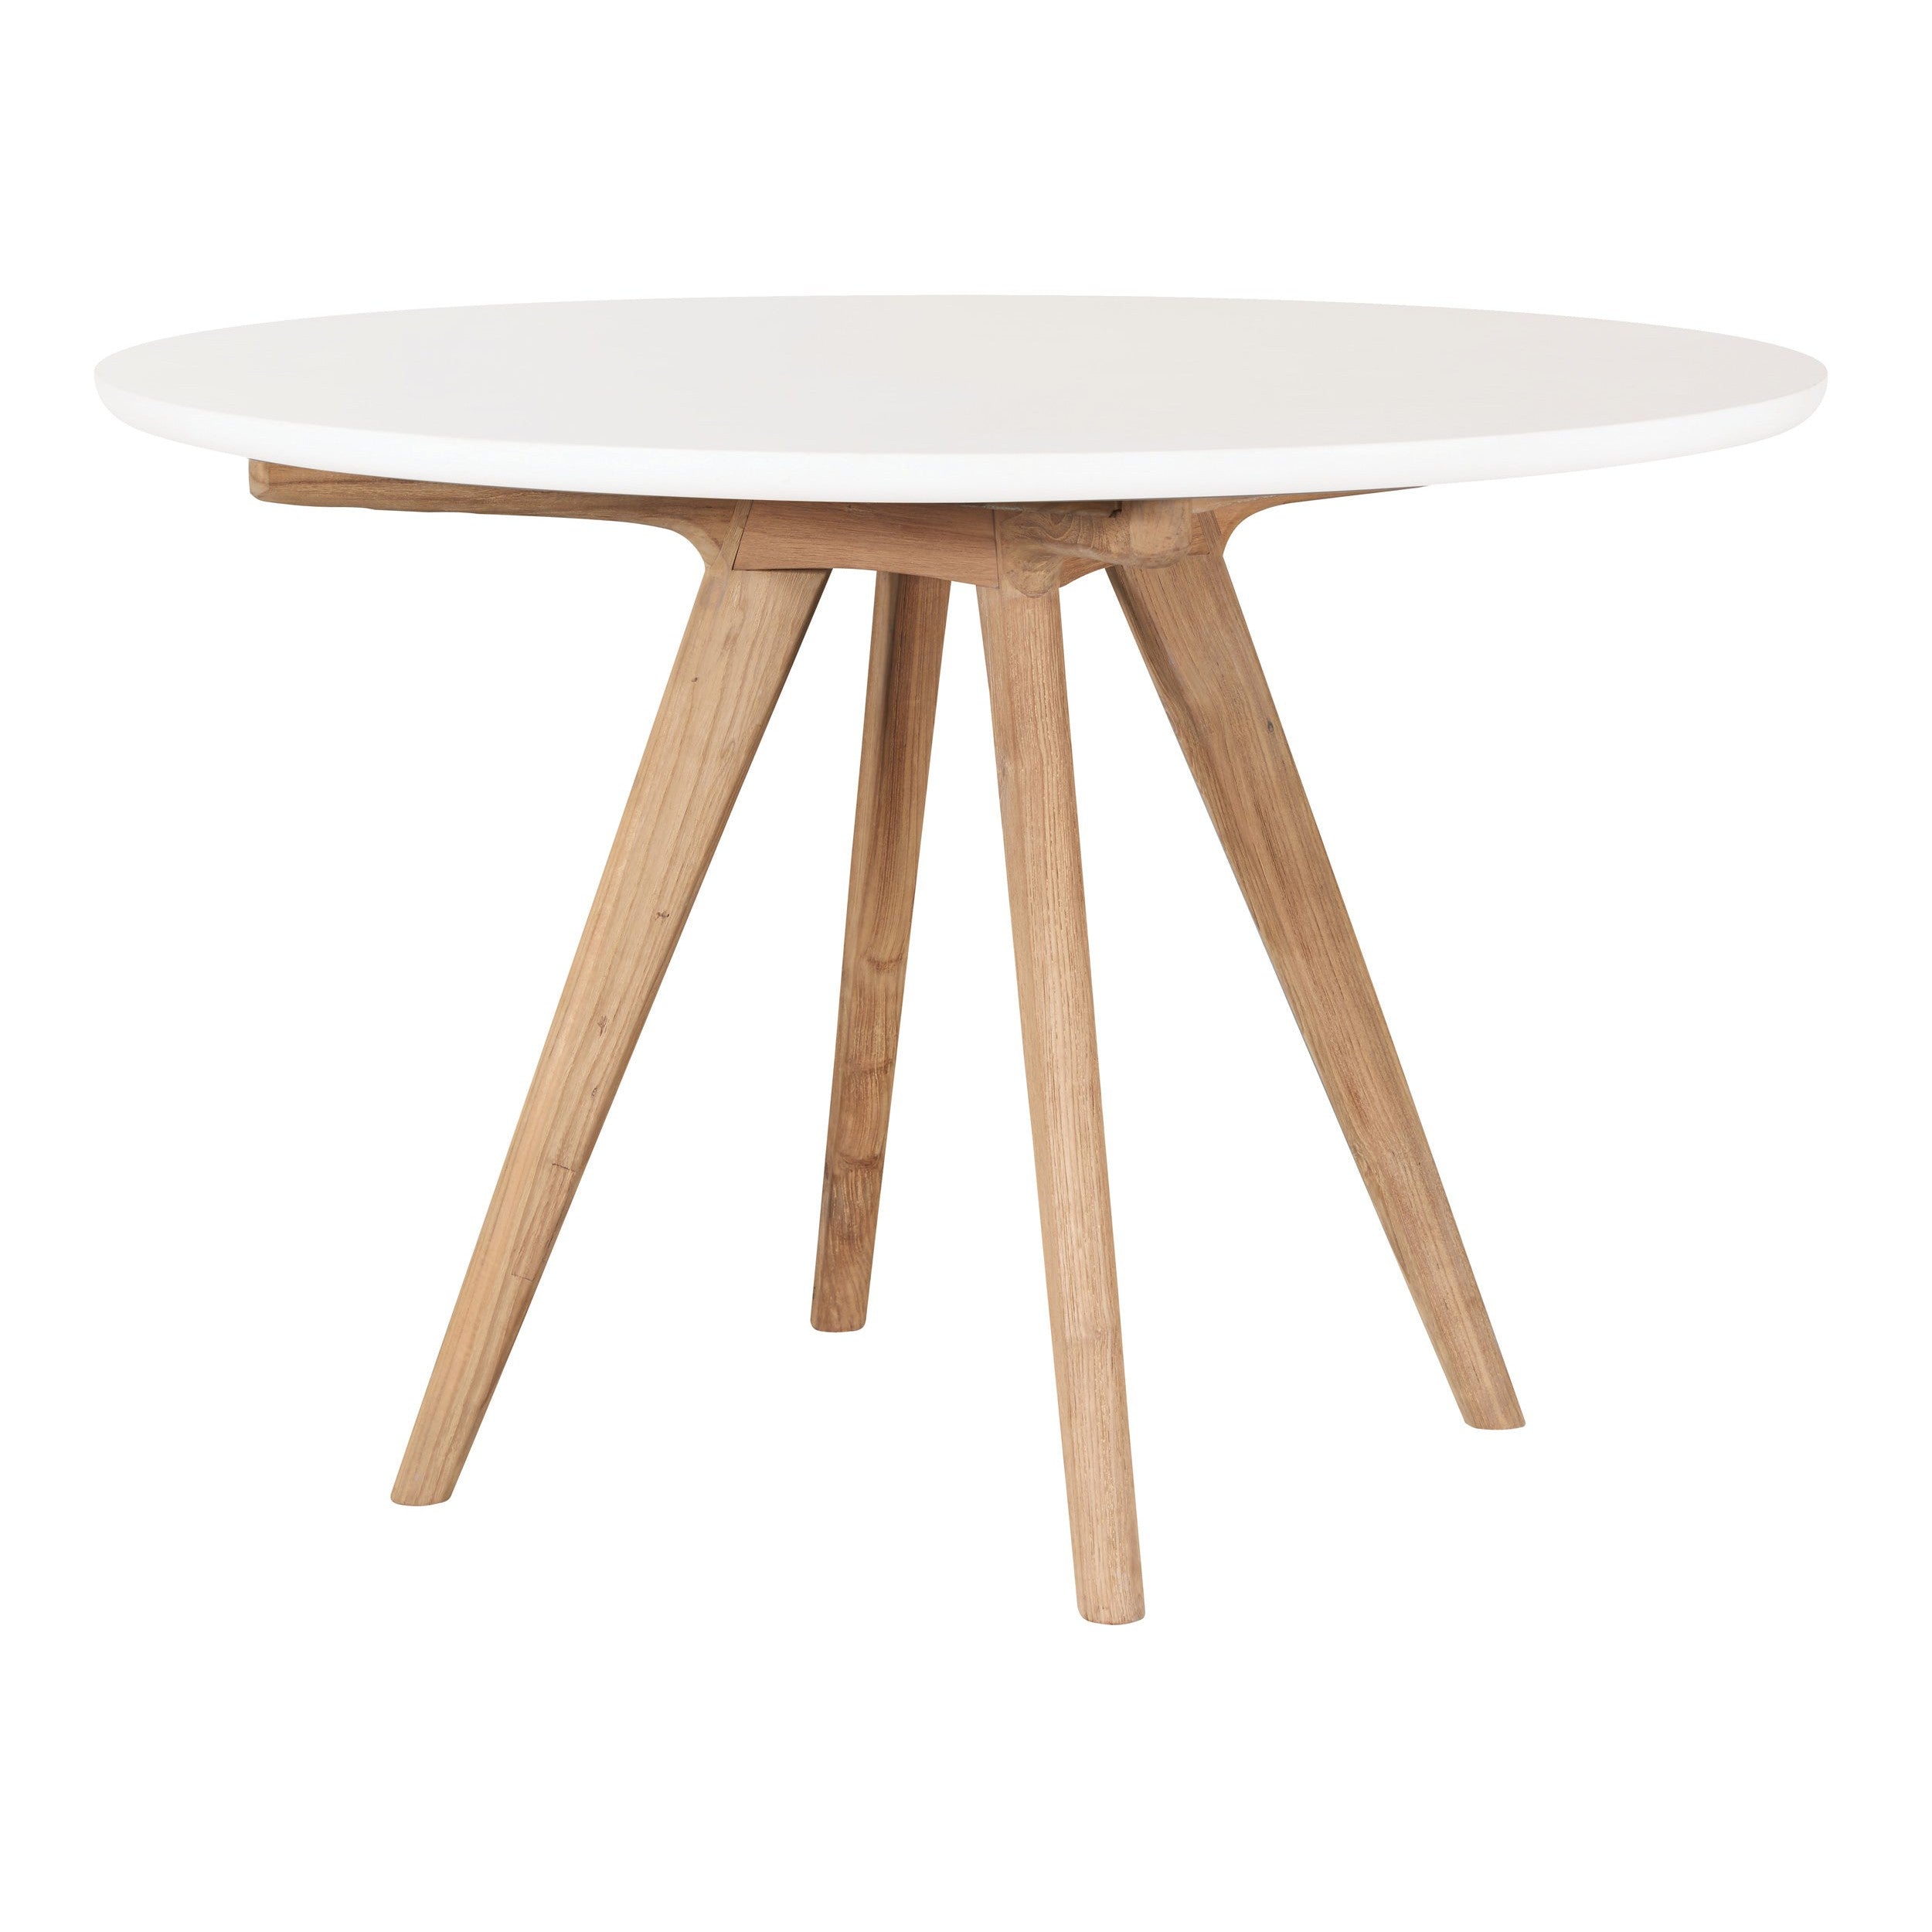 Viola Dining Table - White Teak and Concrete Outdoor Dining Table